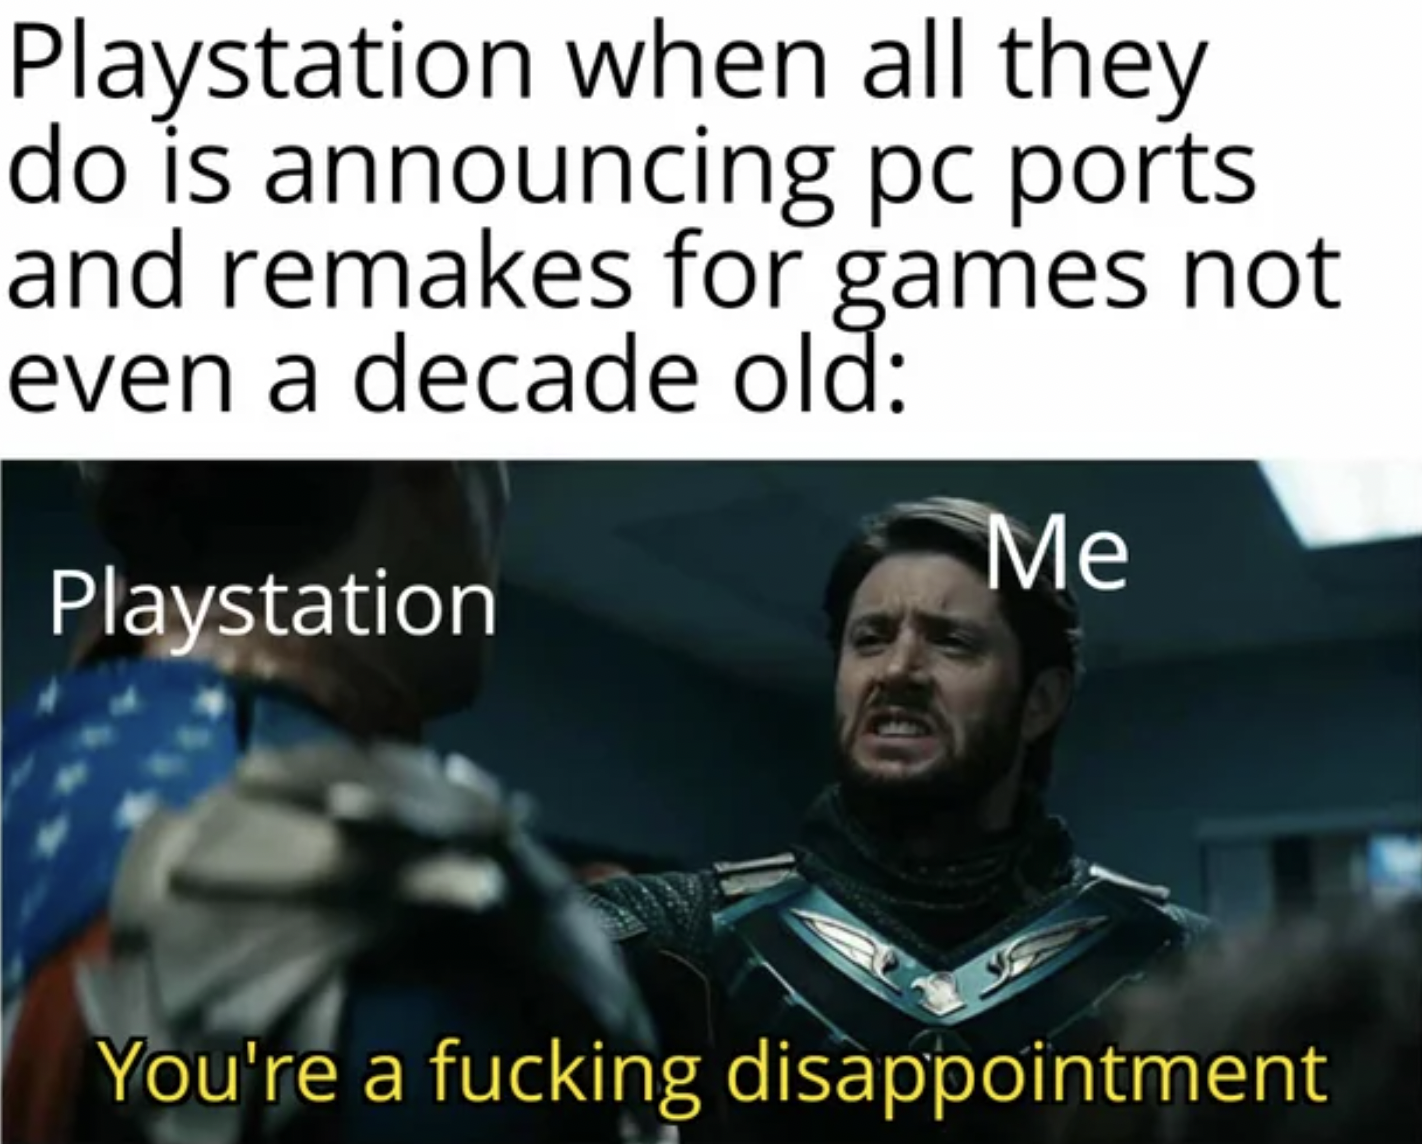 Gaming memes - photo caption - Playstation when all they do is announcing pc ports and remakes for games not even a decade old Playstation Me You're adisappointment